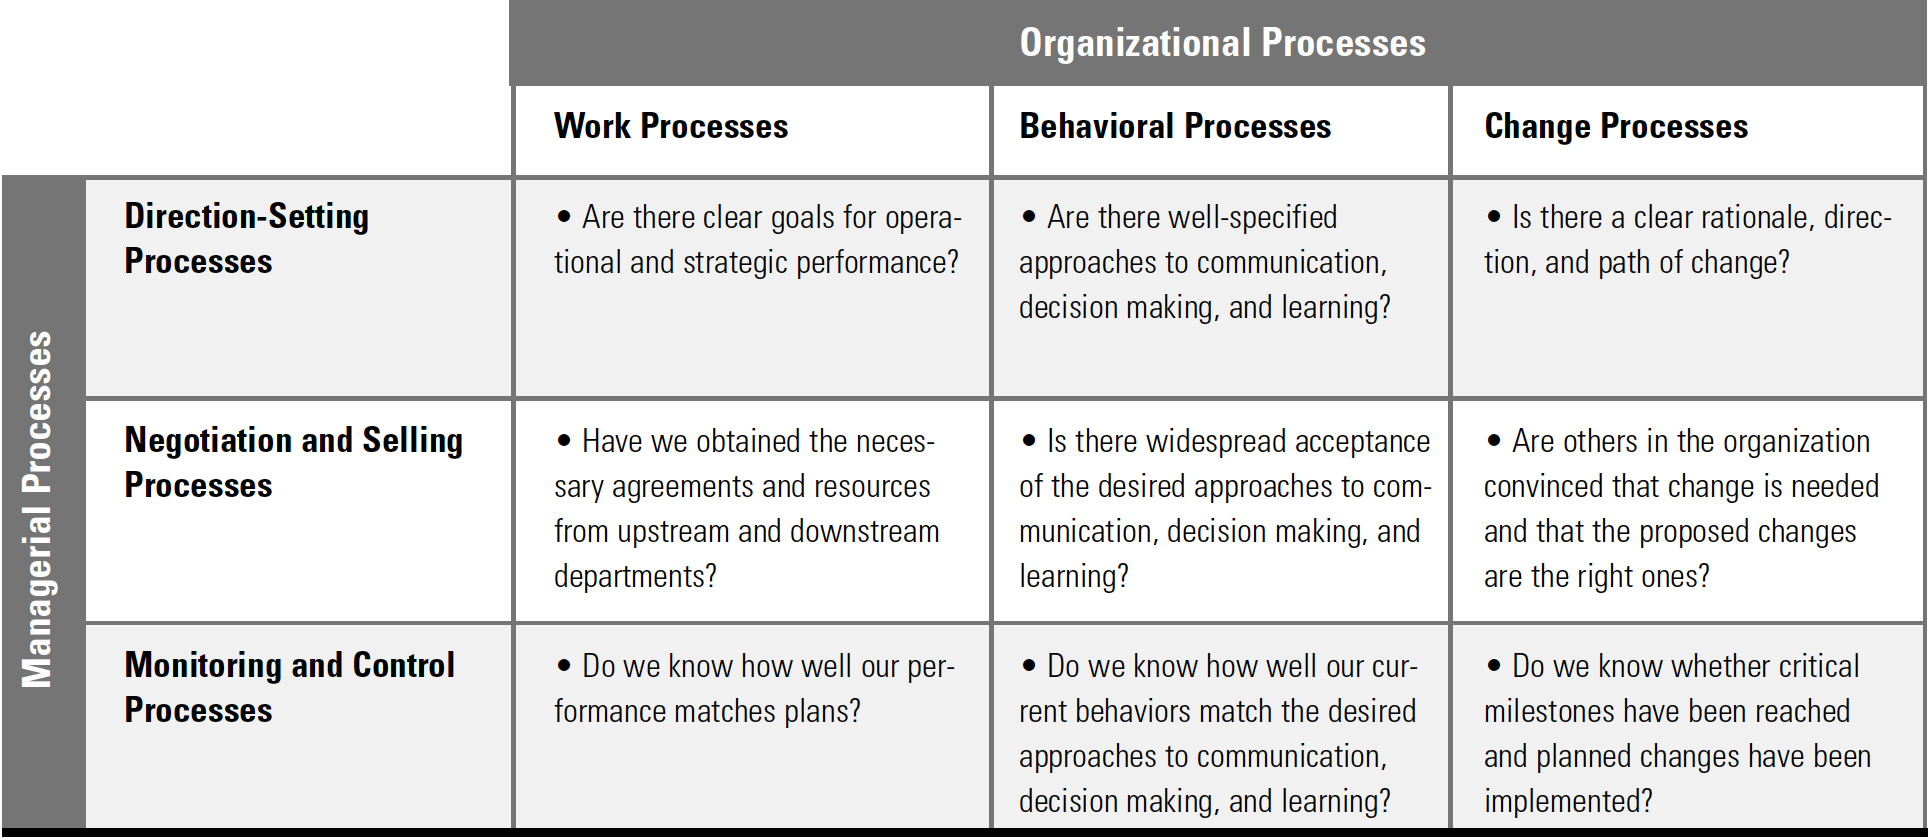 What Are the Roles of an Employee in the Implementation Process?